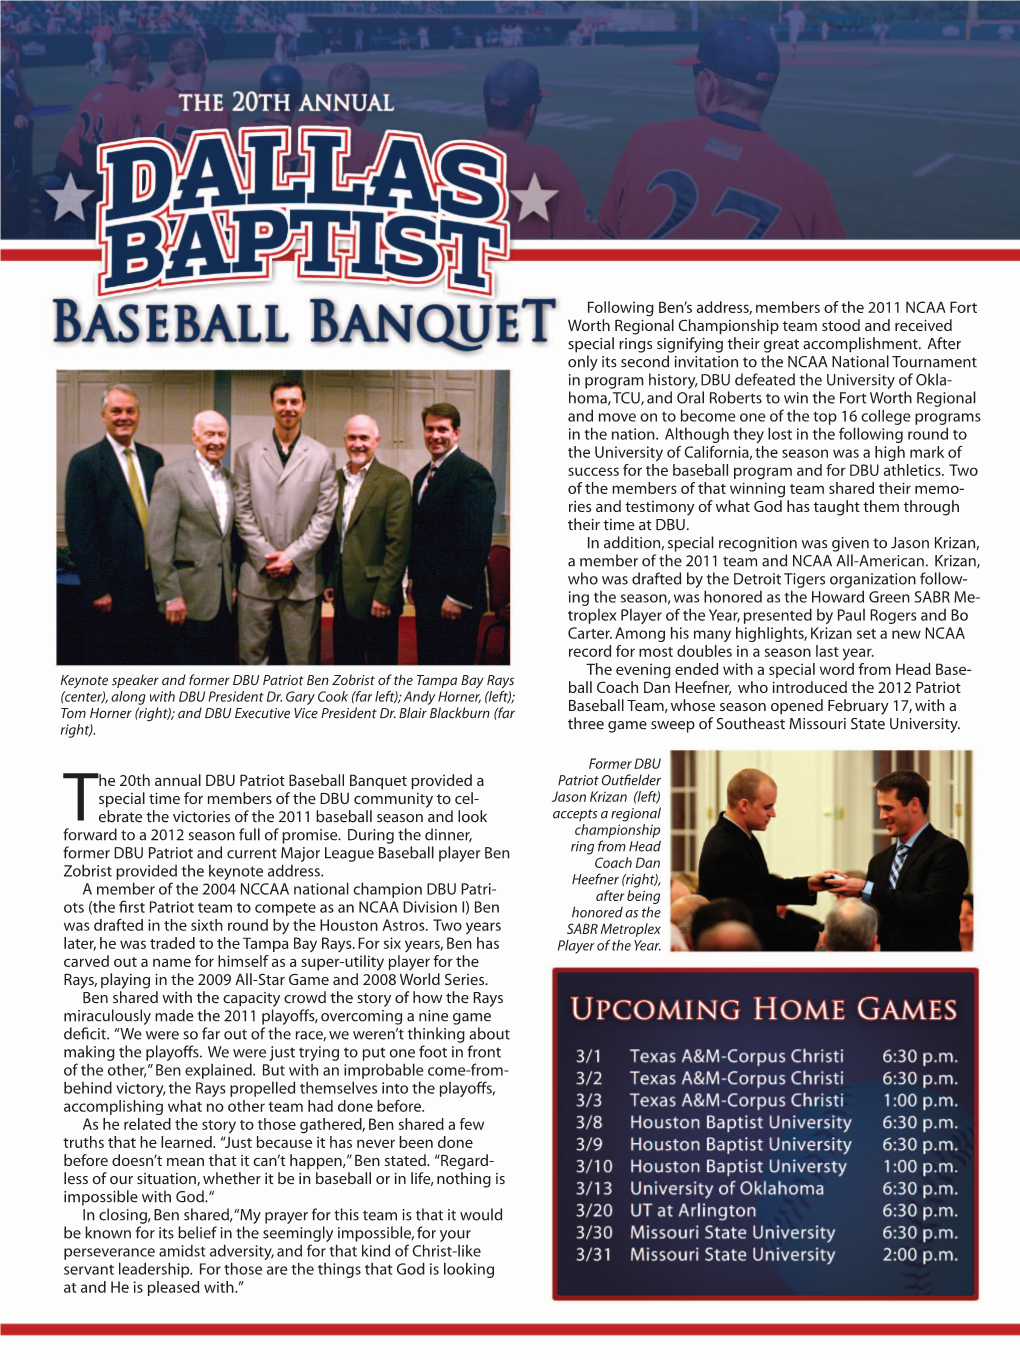 The 20Th Annual DBU Patriot Baseball Banquet Provided a Special Time For